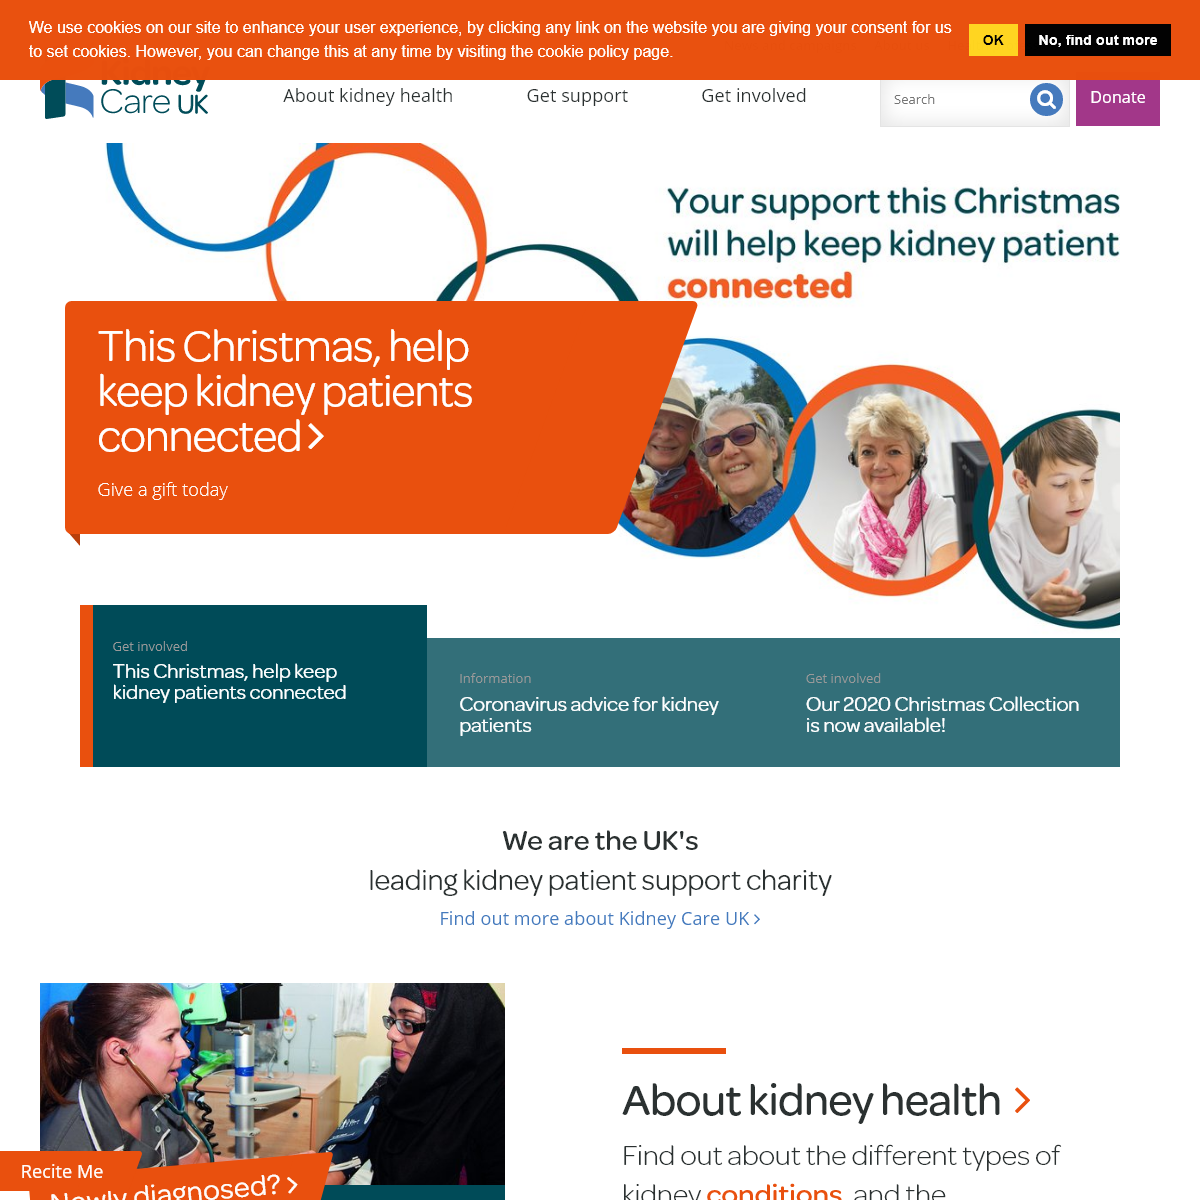 A complete backup of kidneycareuk.org